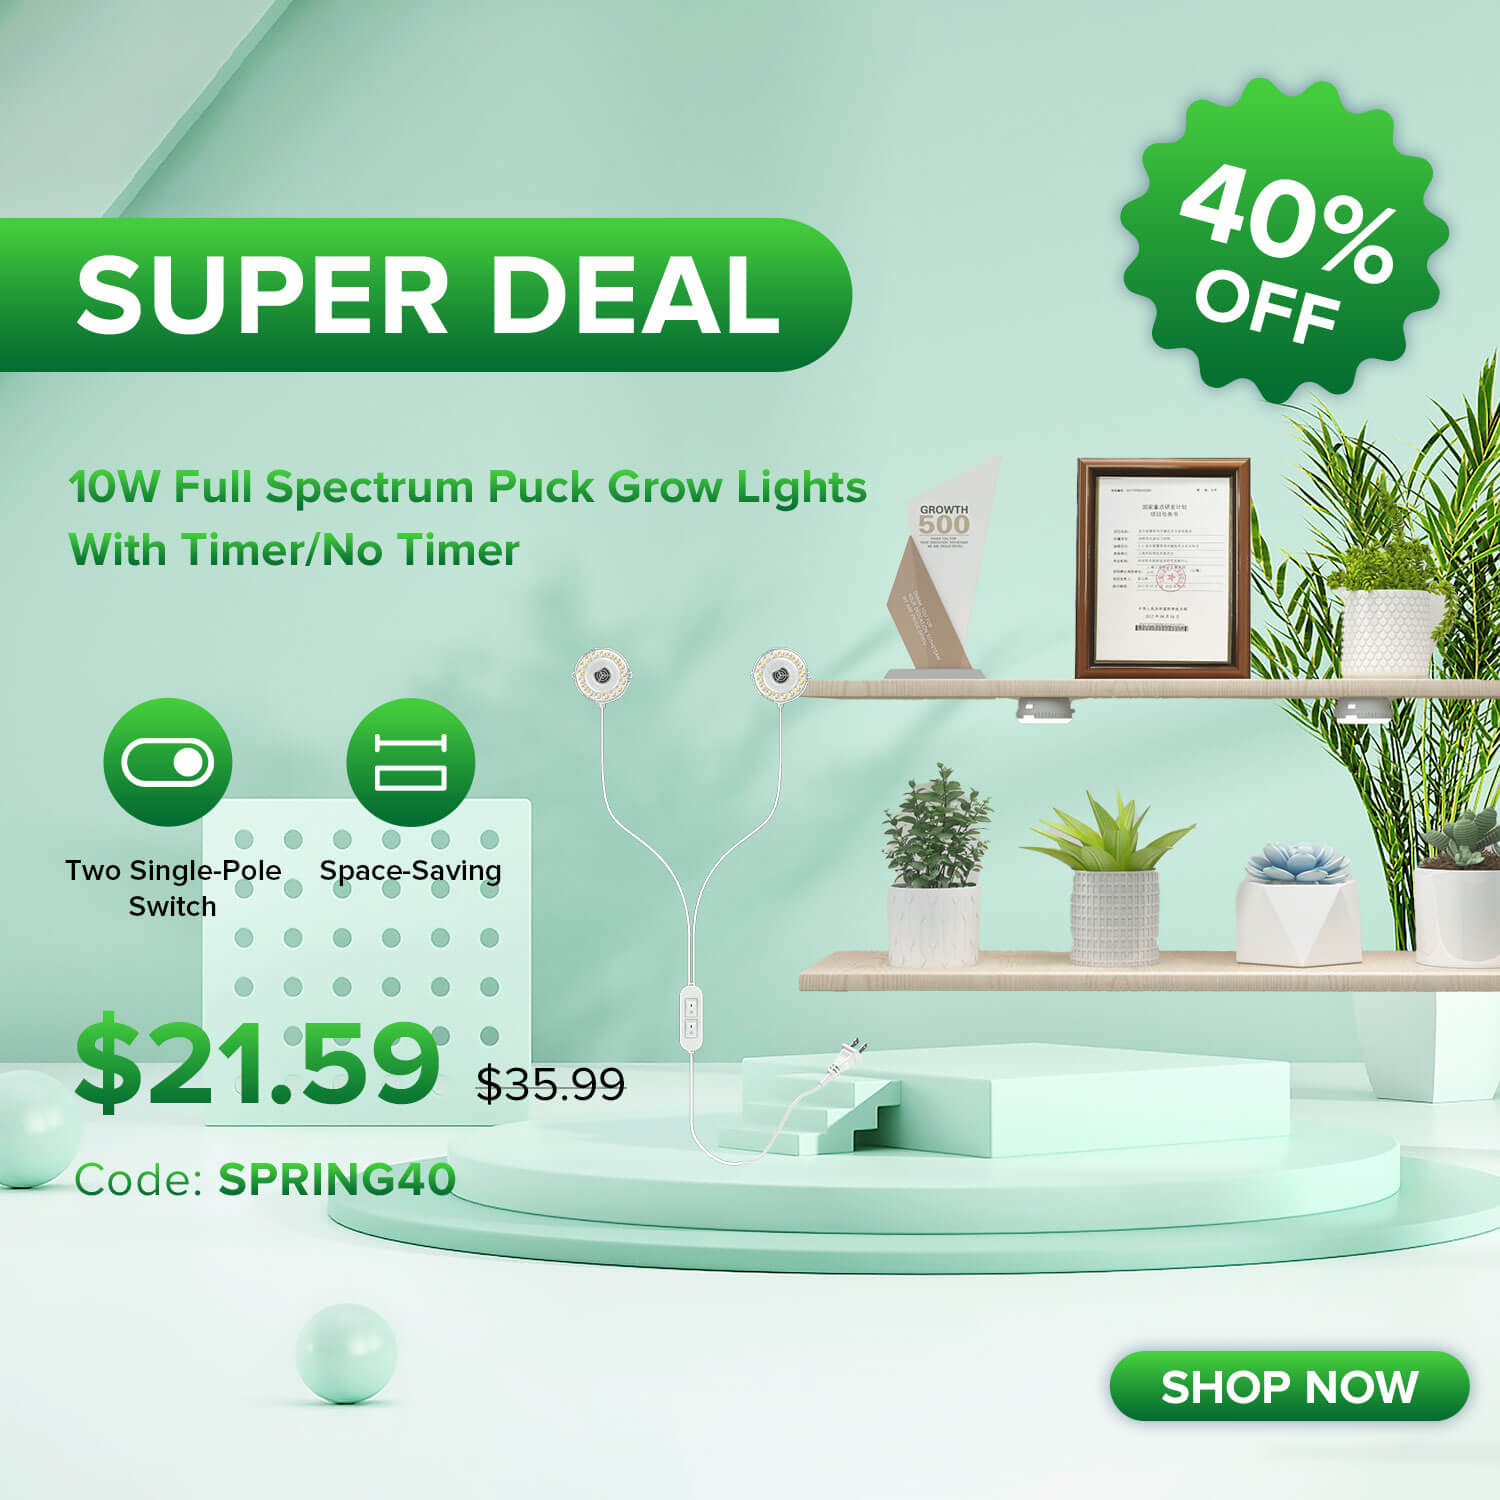 SUPER DEAL 40% OFF for 10W Full Spectrum Puck Grow LightsWith Timer/No Timer